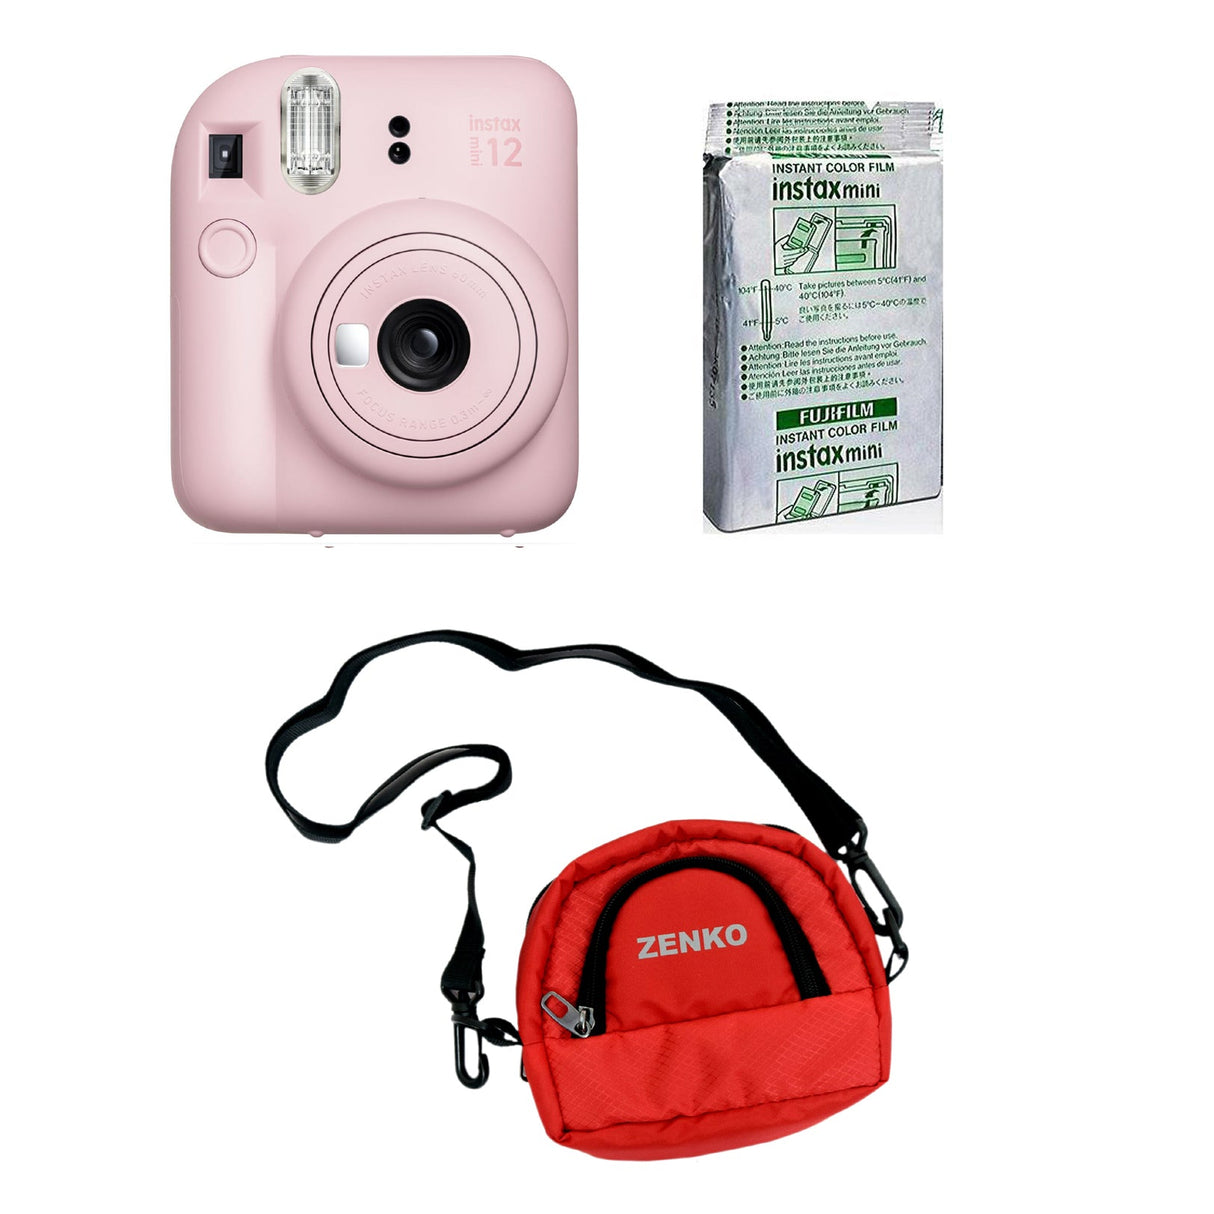 FUJIFILM INSTAX Mini 12 Instant Film Camera with 10X1 Pack of Instant Film With Red Pouch Kit (10 Exposures) Blossom Pink